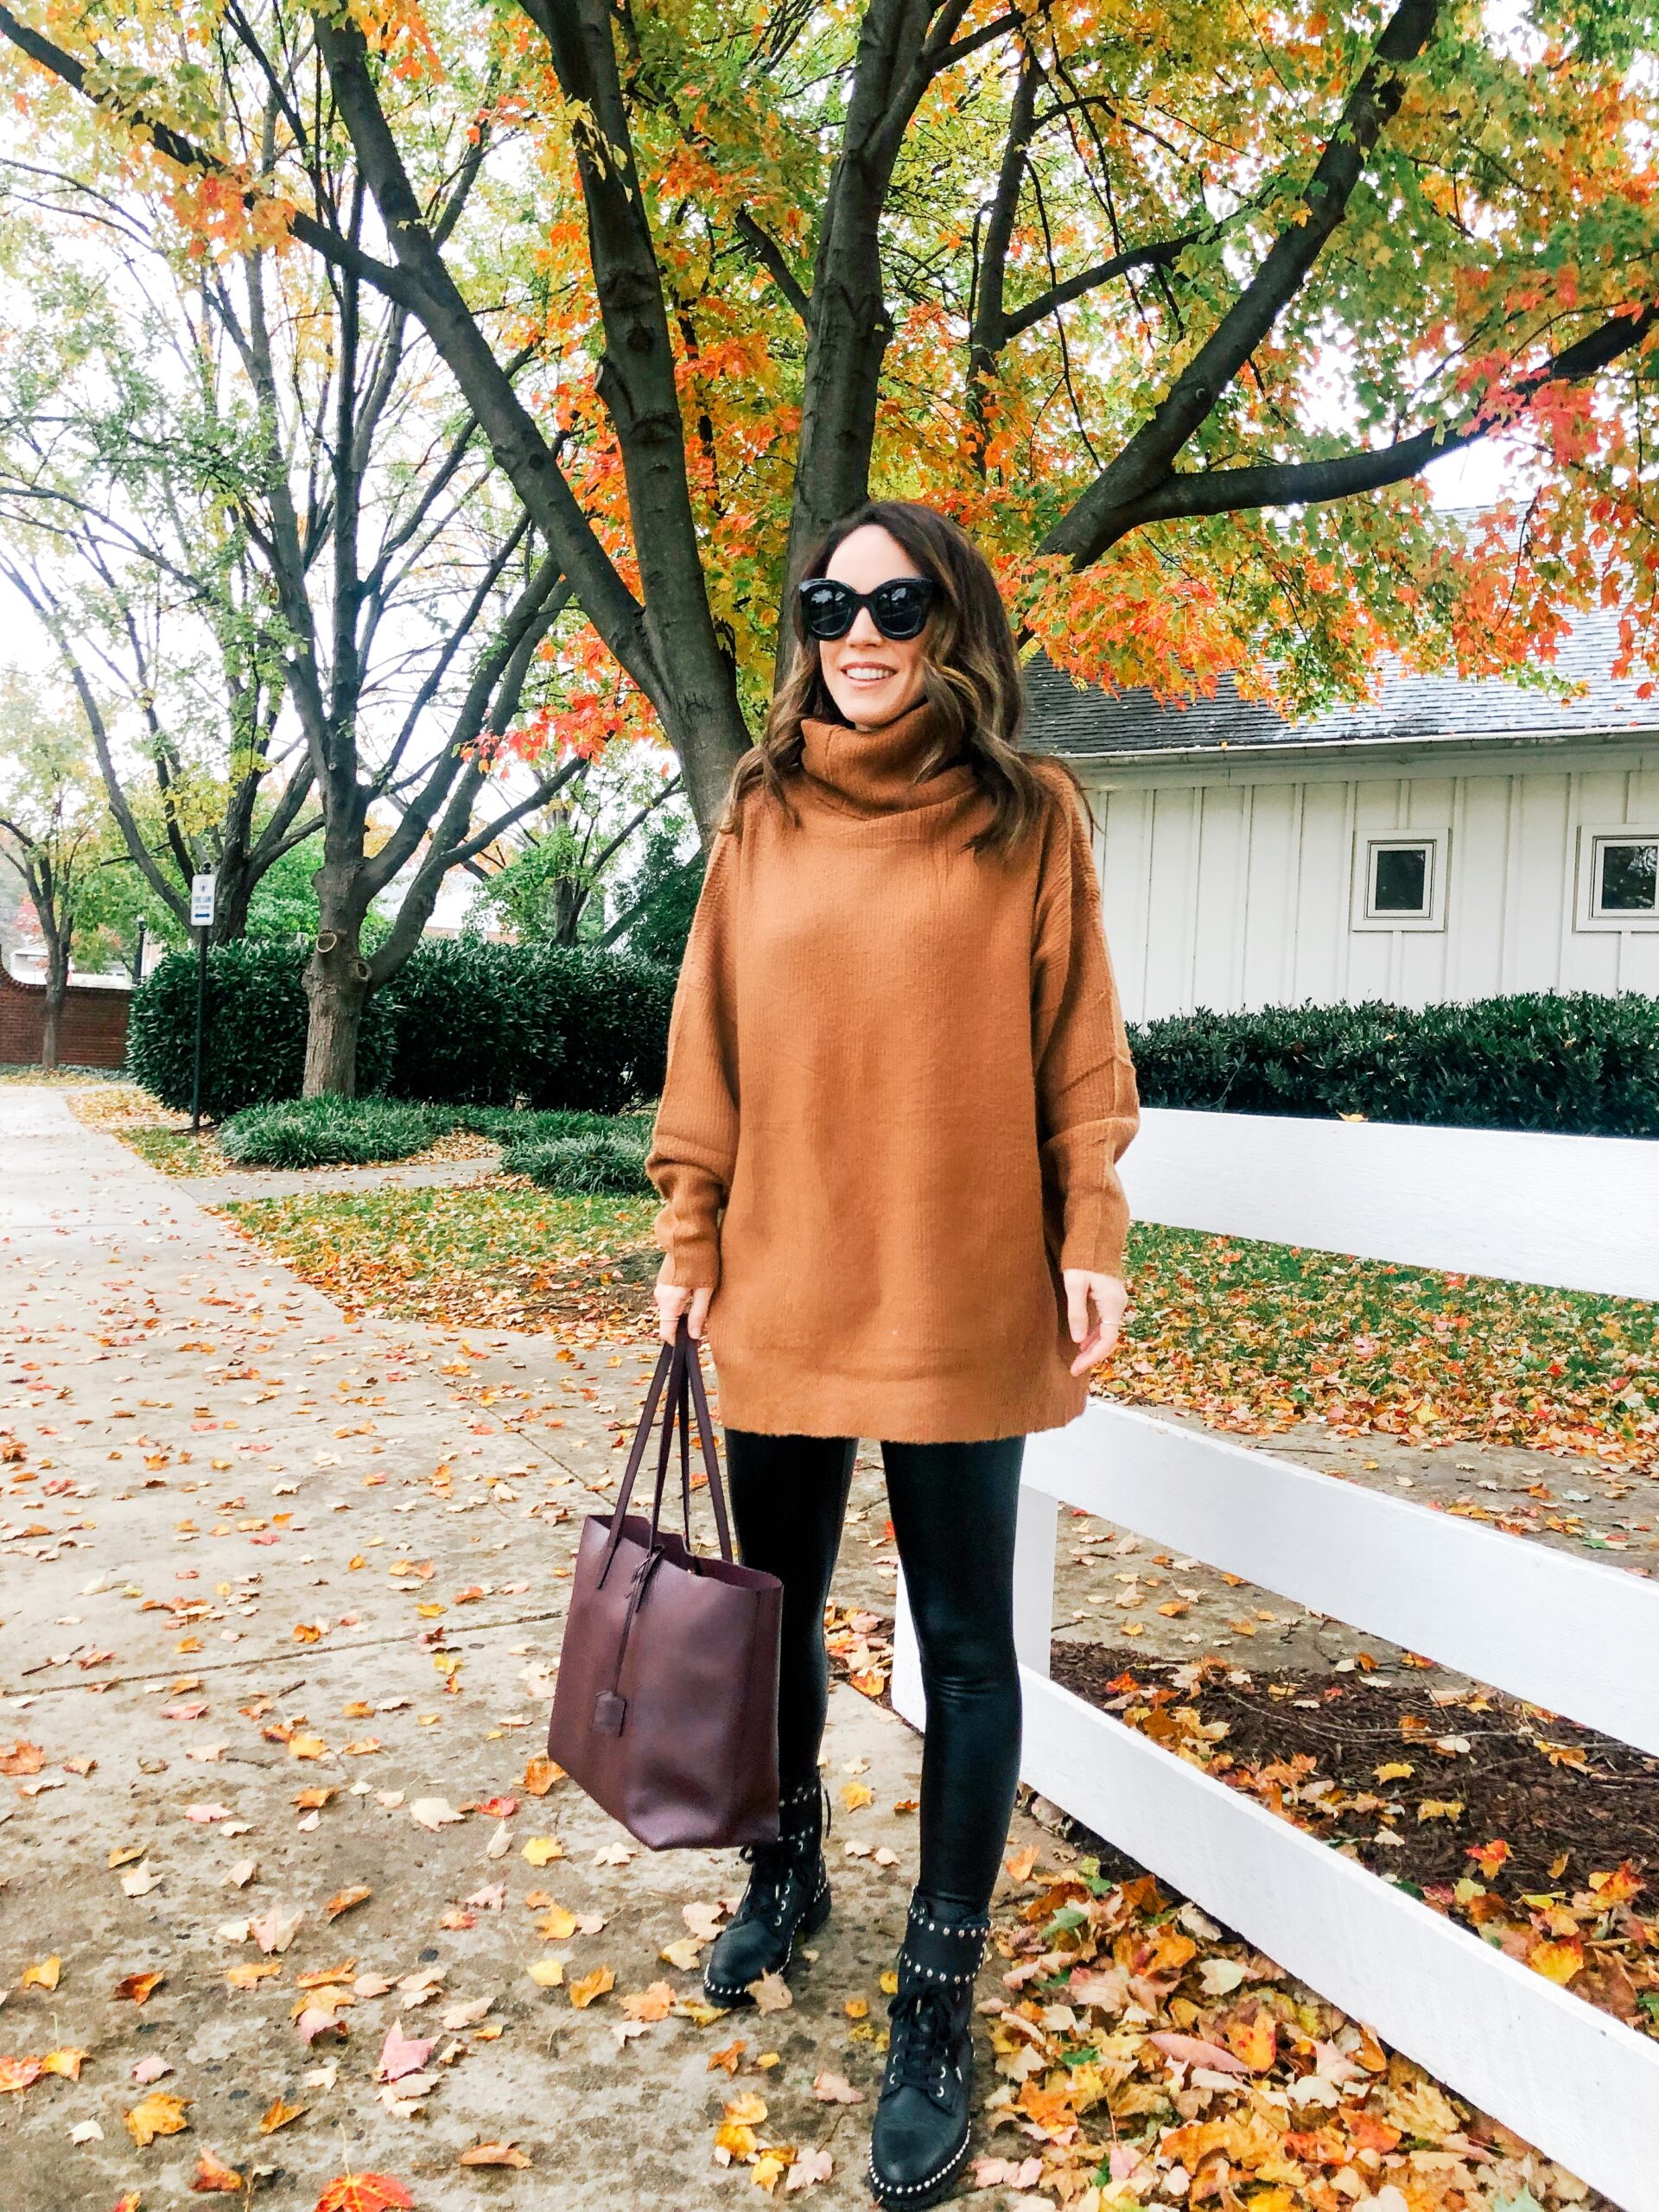 Black Legging Outfit Ideas for Fall